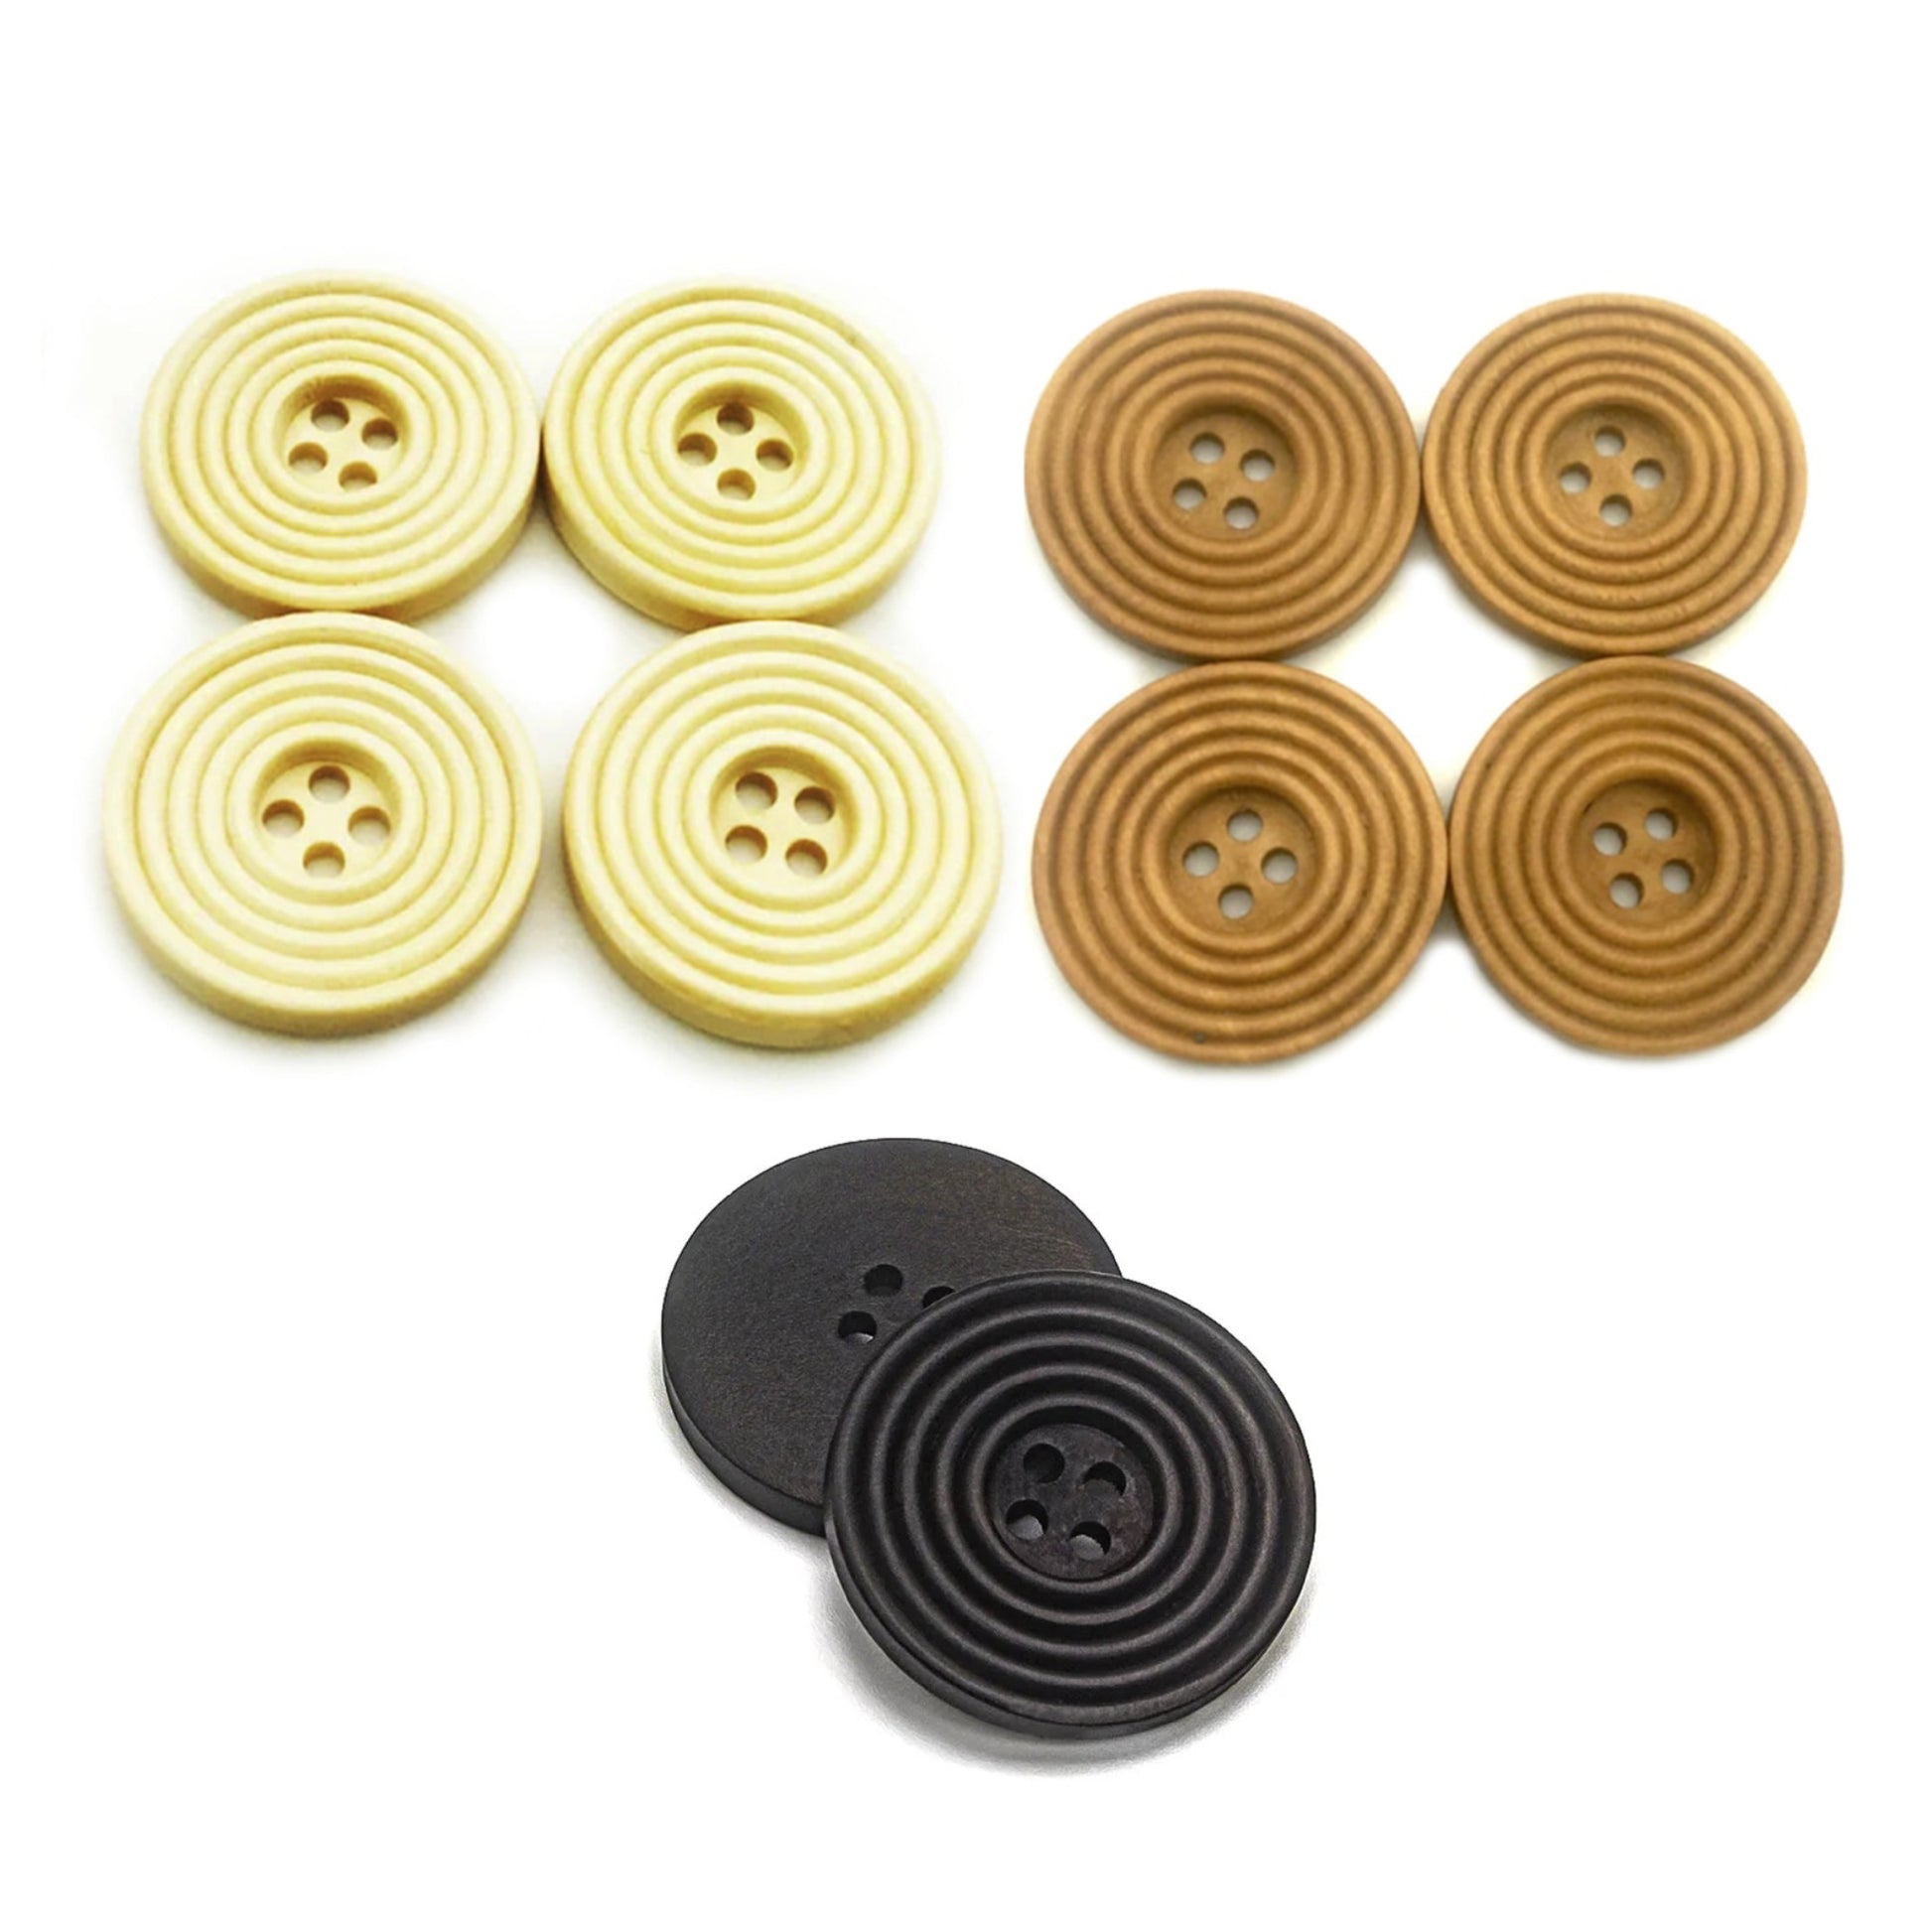 7pcs White Brown Black Ringed Wooden Extra Large Buttons 30mm 4-Hole Round Sewing DIY